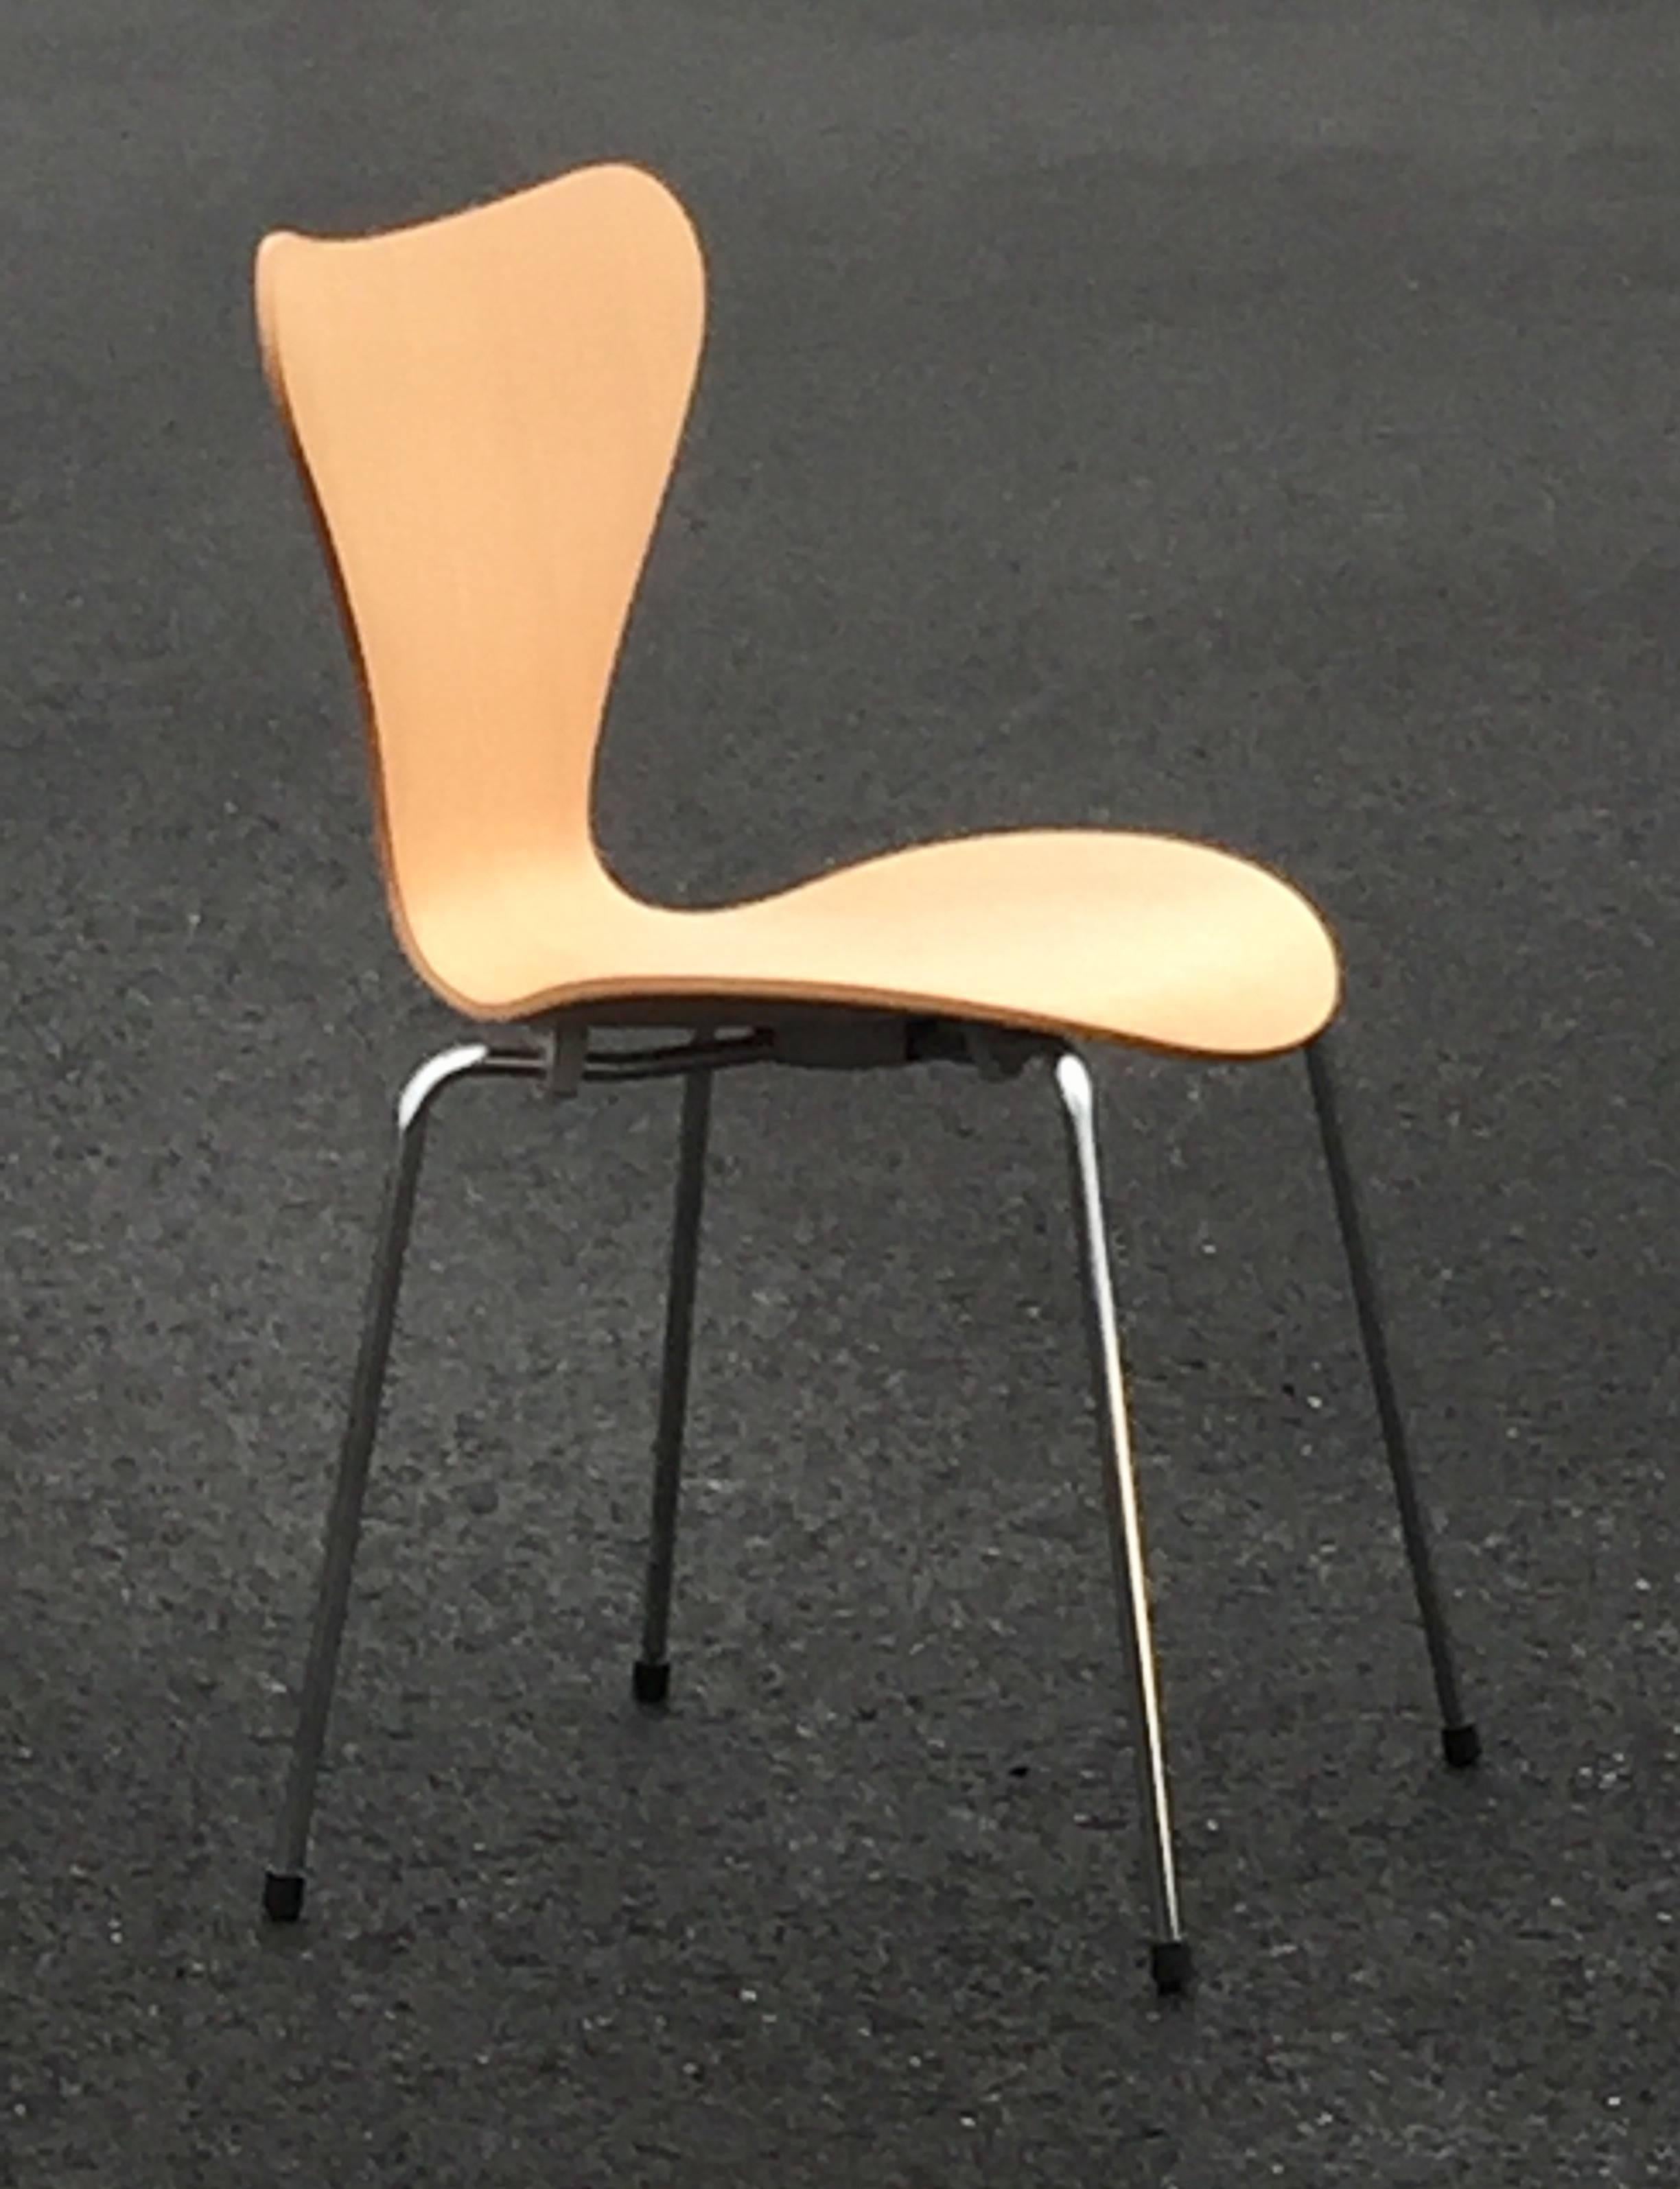 Iconic Arne Jacobsen design, natural finish, Mid-Century Modern stackable dining or conference room chairs with chrome legs.  Three are ash molded seats, one is oak. Label underside.
Will sell individually for $375/chair.
Measures: Seat height: 17